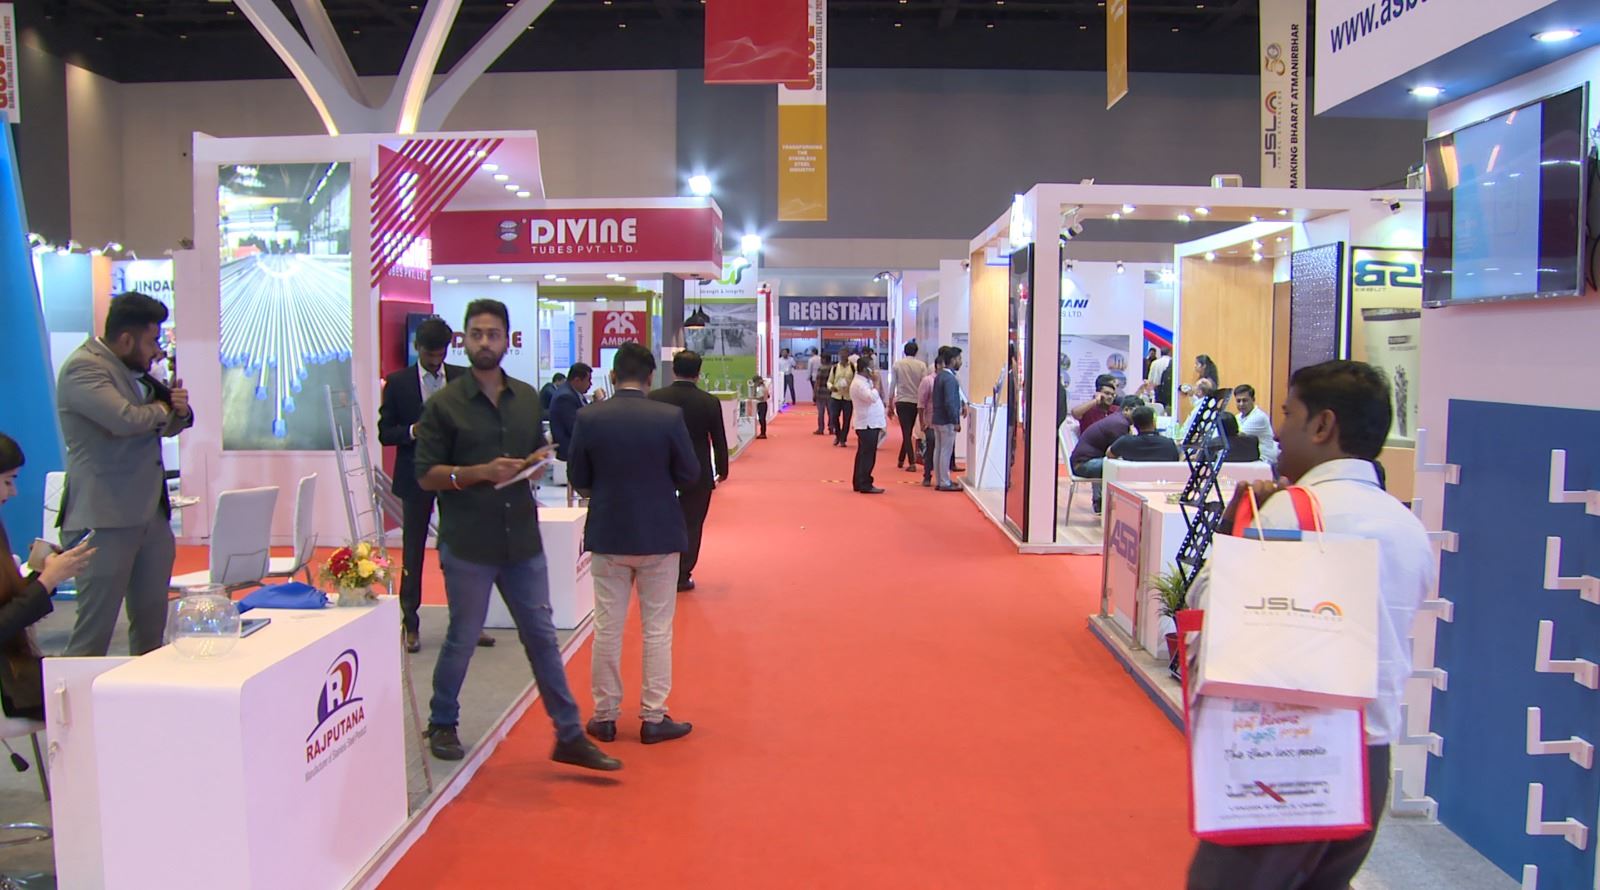 Global Stainless Steel Exhibition (GSSE) kicks off in Mumbai, uniting industry stakeholders